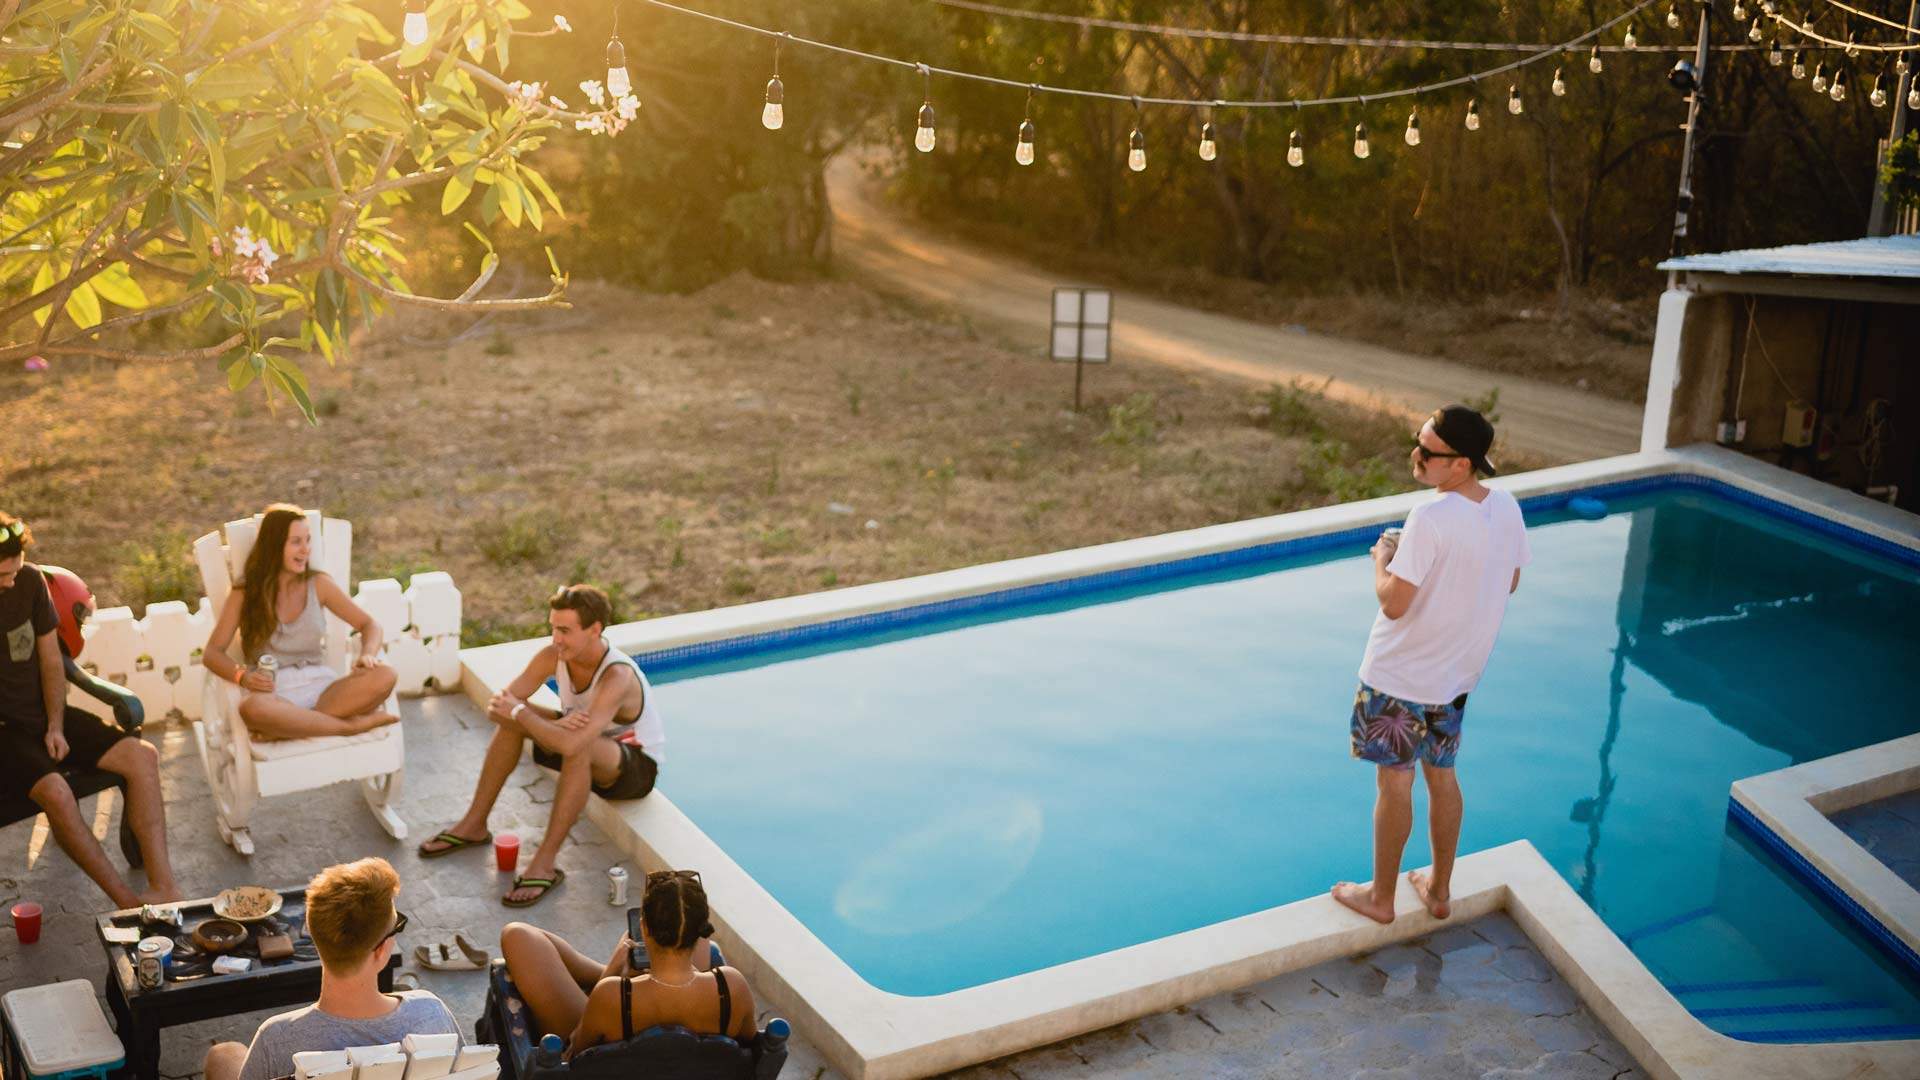 Airbnb-Like Pool-Sharing Service Swimply Has Launched in Australia Just in Time for Summer